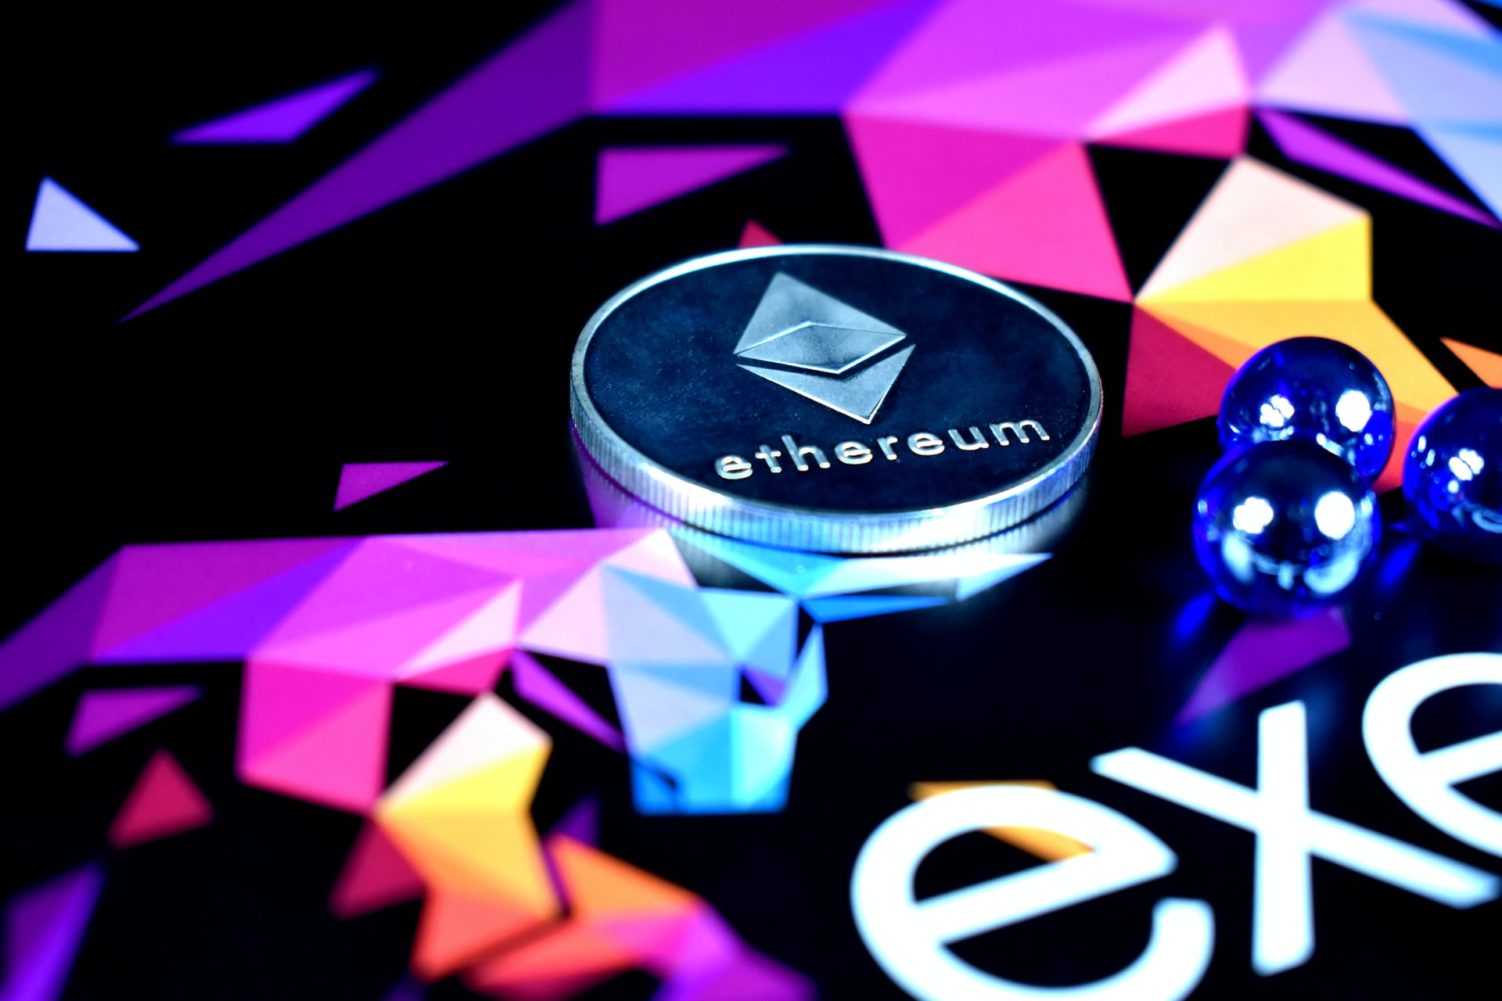 Ethereum is illustrated as a silver coin with colorful background.